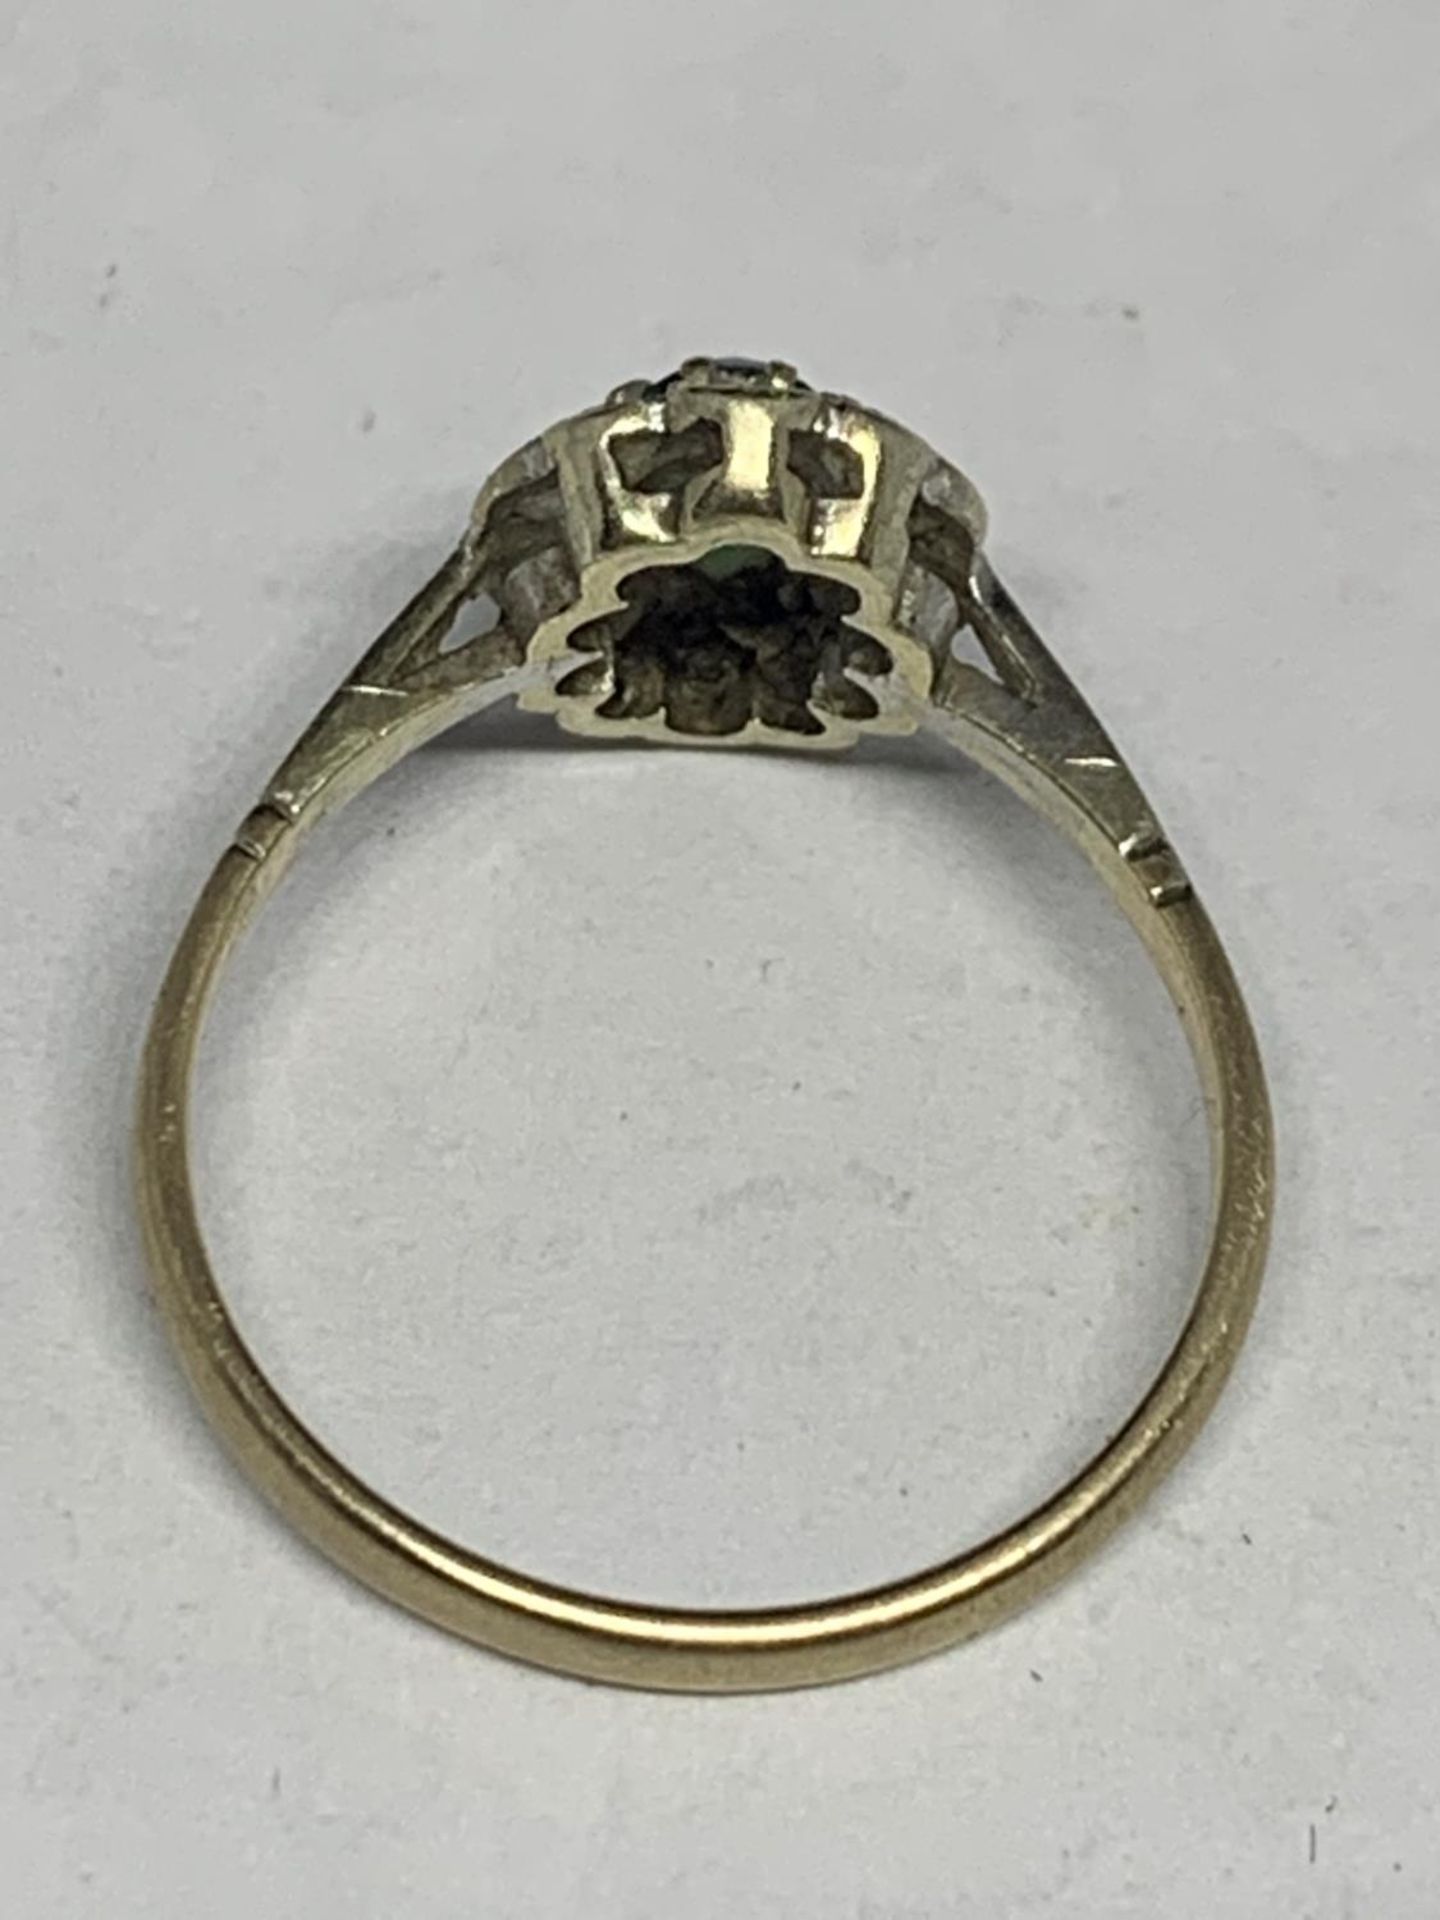 A 9 CARAT GOLD RING WITH A GREEN CENTRE STONE AND CLEAR STONE SURROUNDS SIZE M/N - Image 3 of 3